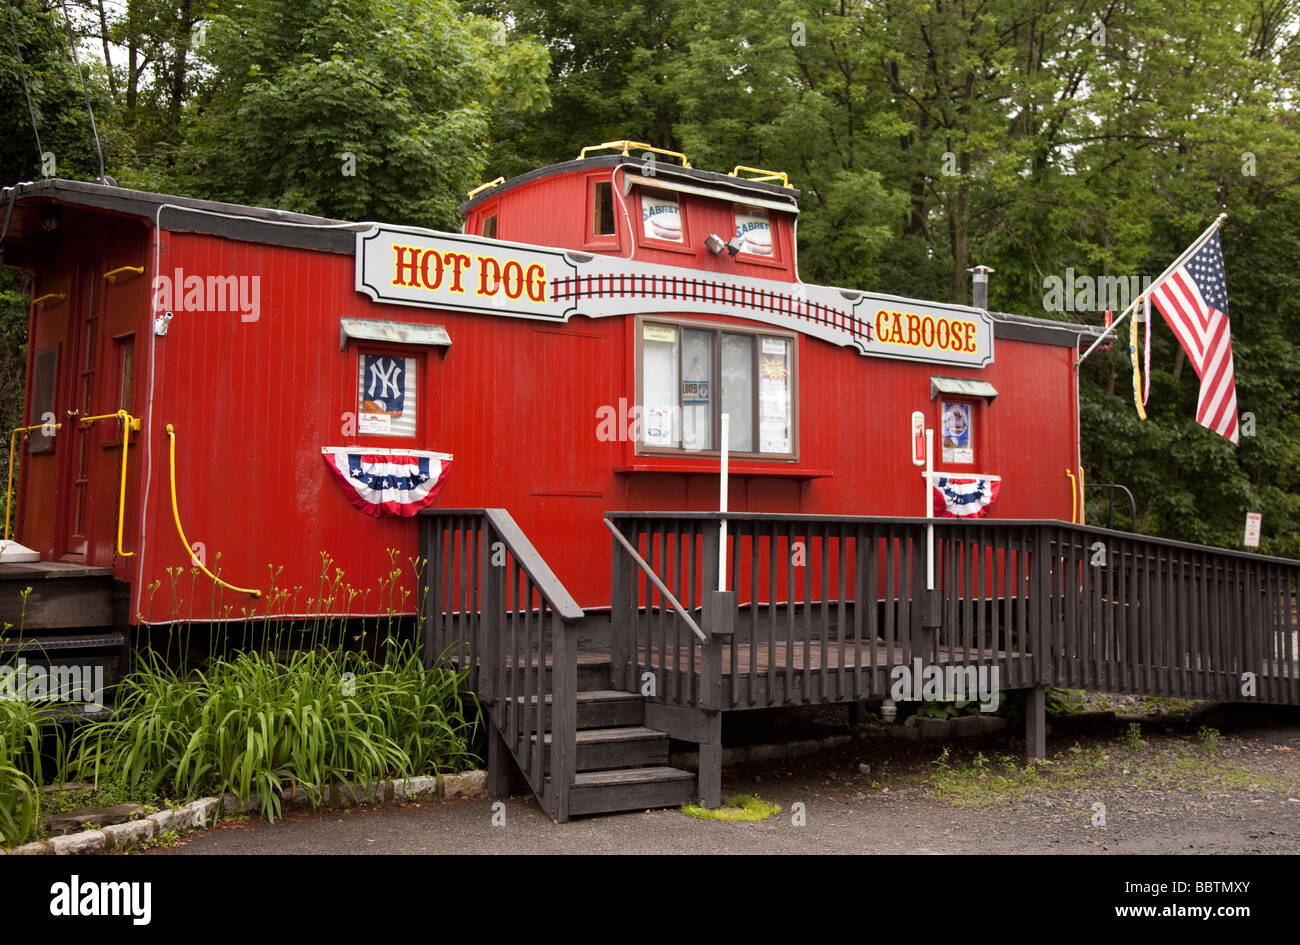 An old caboose converted into a restaurant Stock Photo